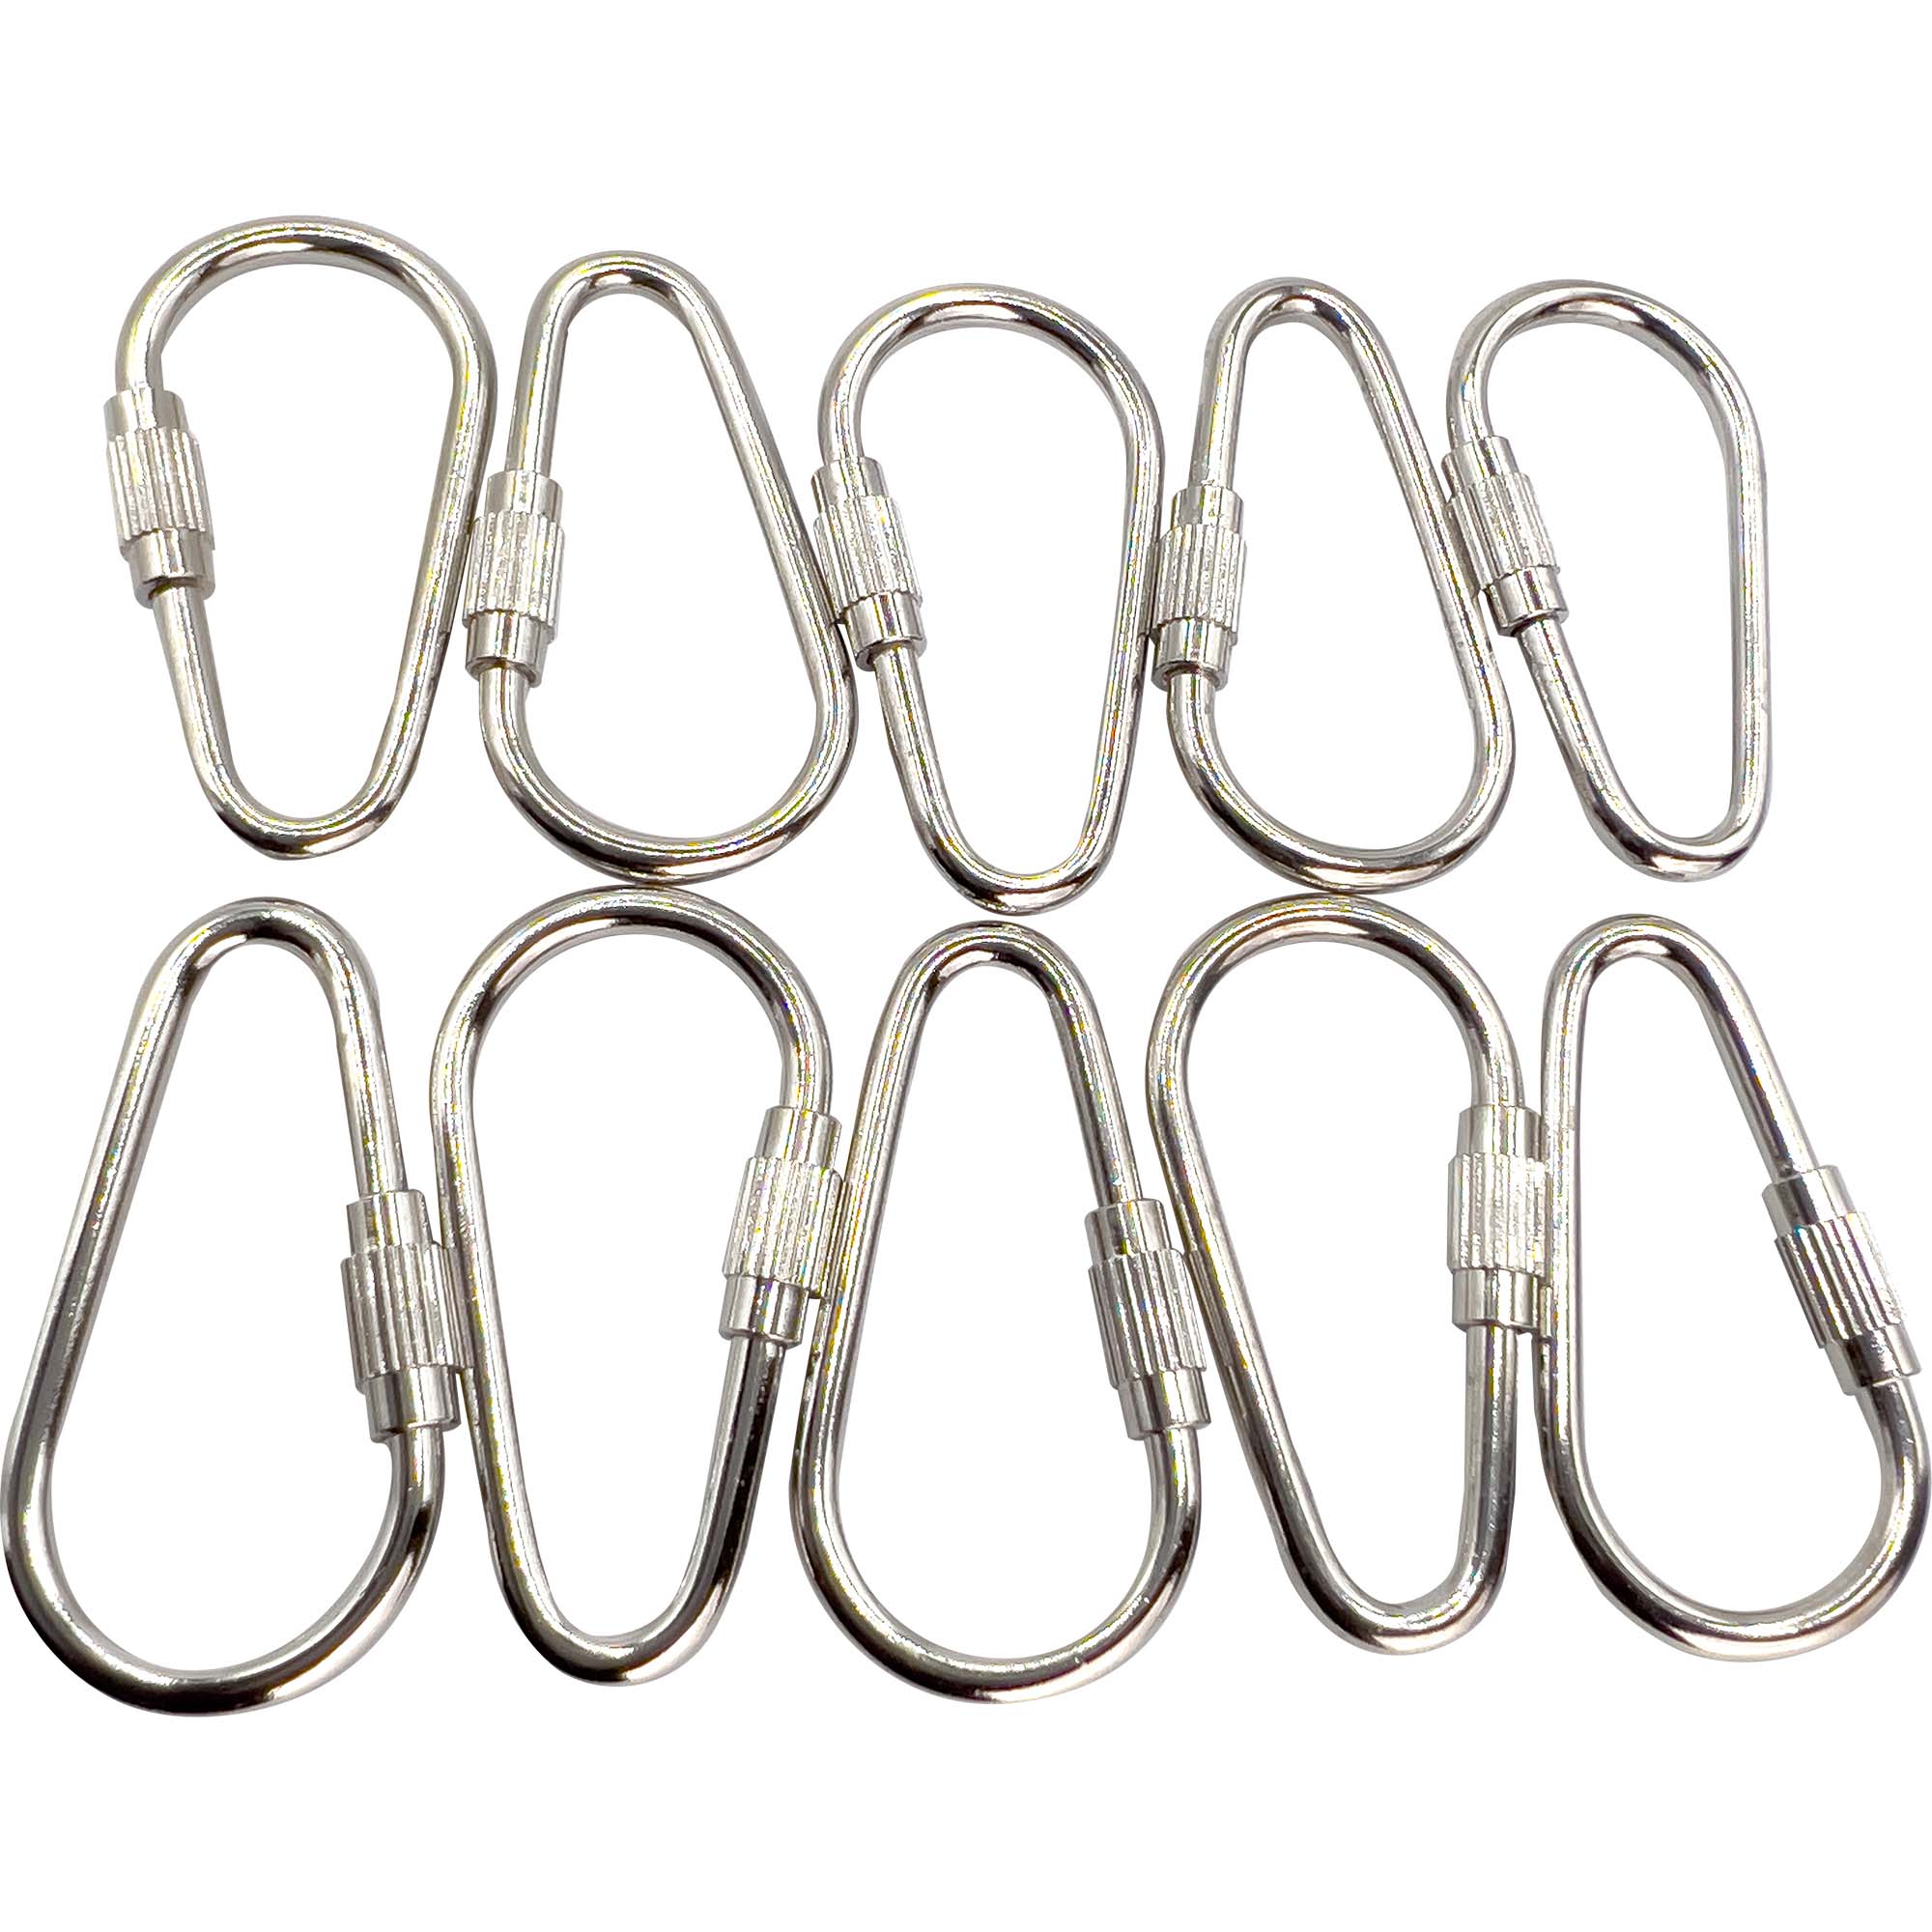 KPNG Stainless Steel 3 Inch S Shaped Hooks Metal Hangers Hanging Hooks for  Home Hook 12 Price in India - Buy KPNG Stainless Steel 3 Inch S Shaped Hooks  Metal Hangers Hanging